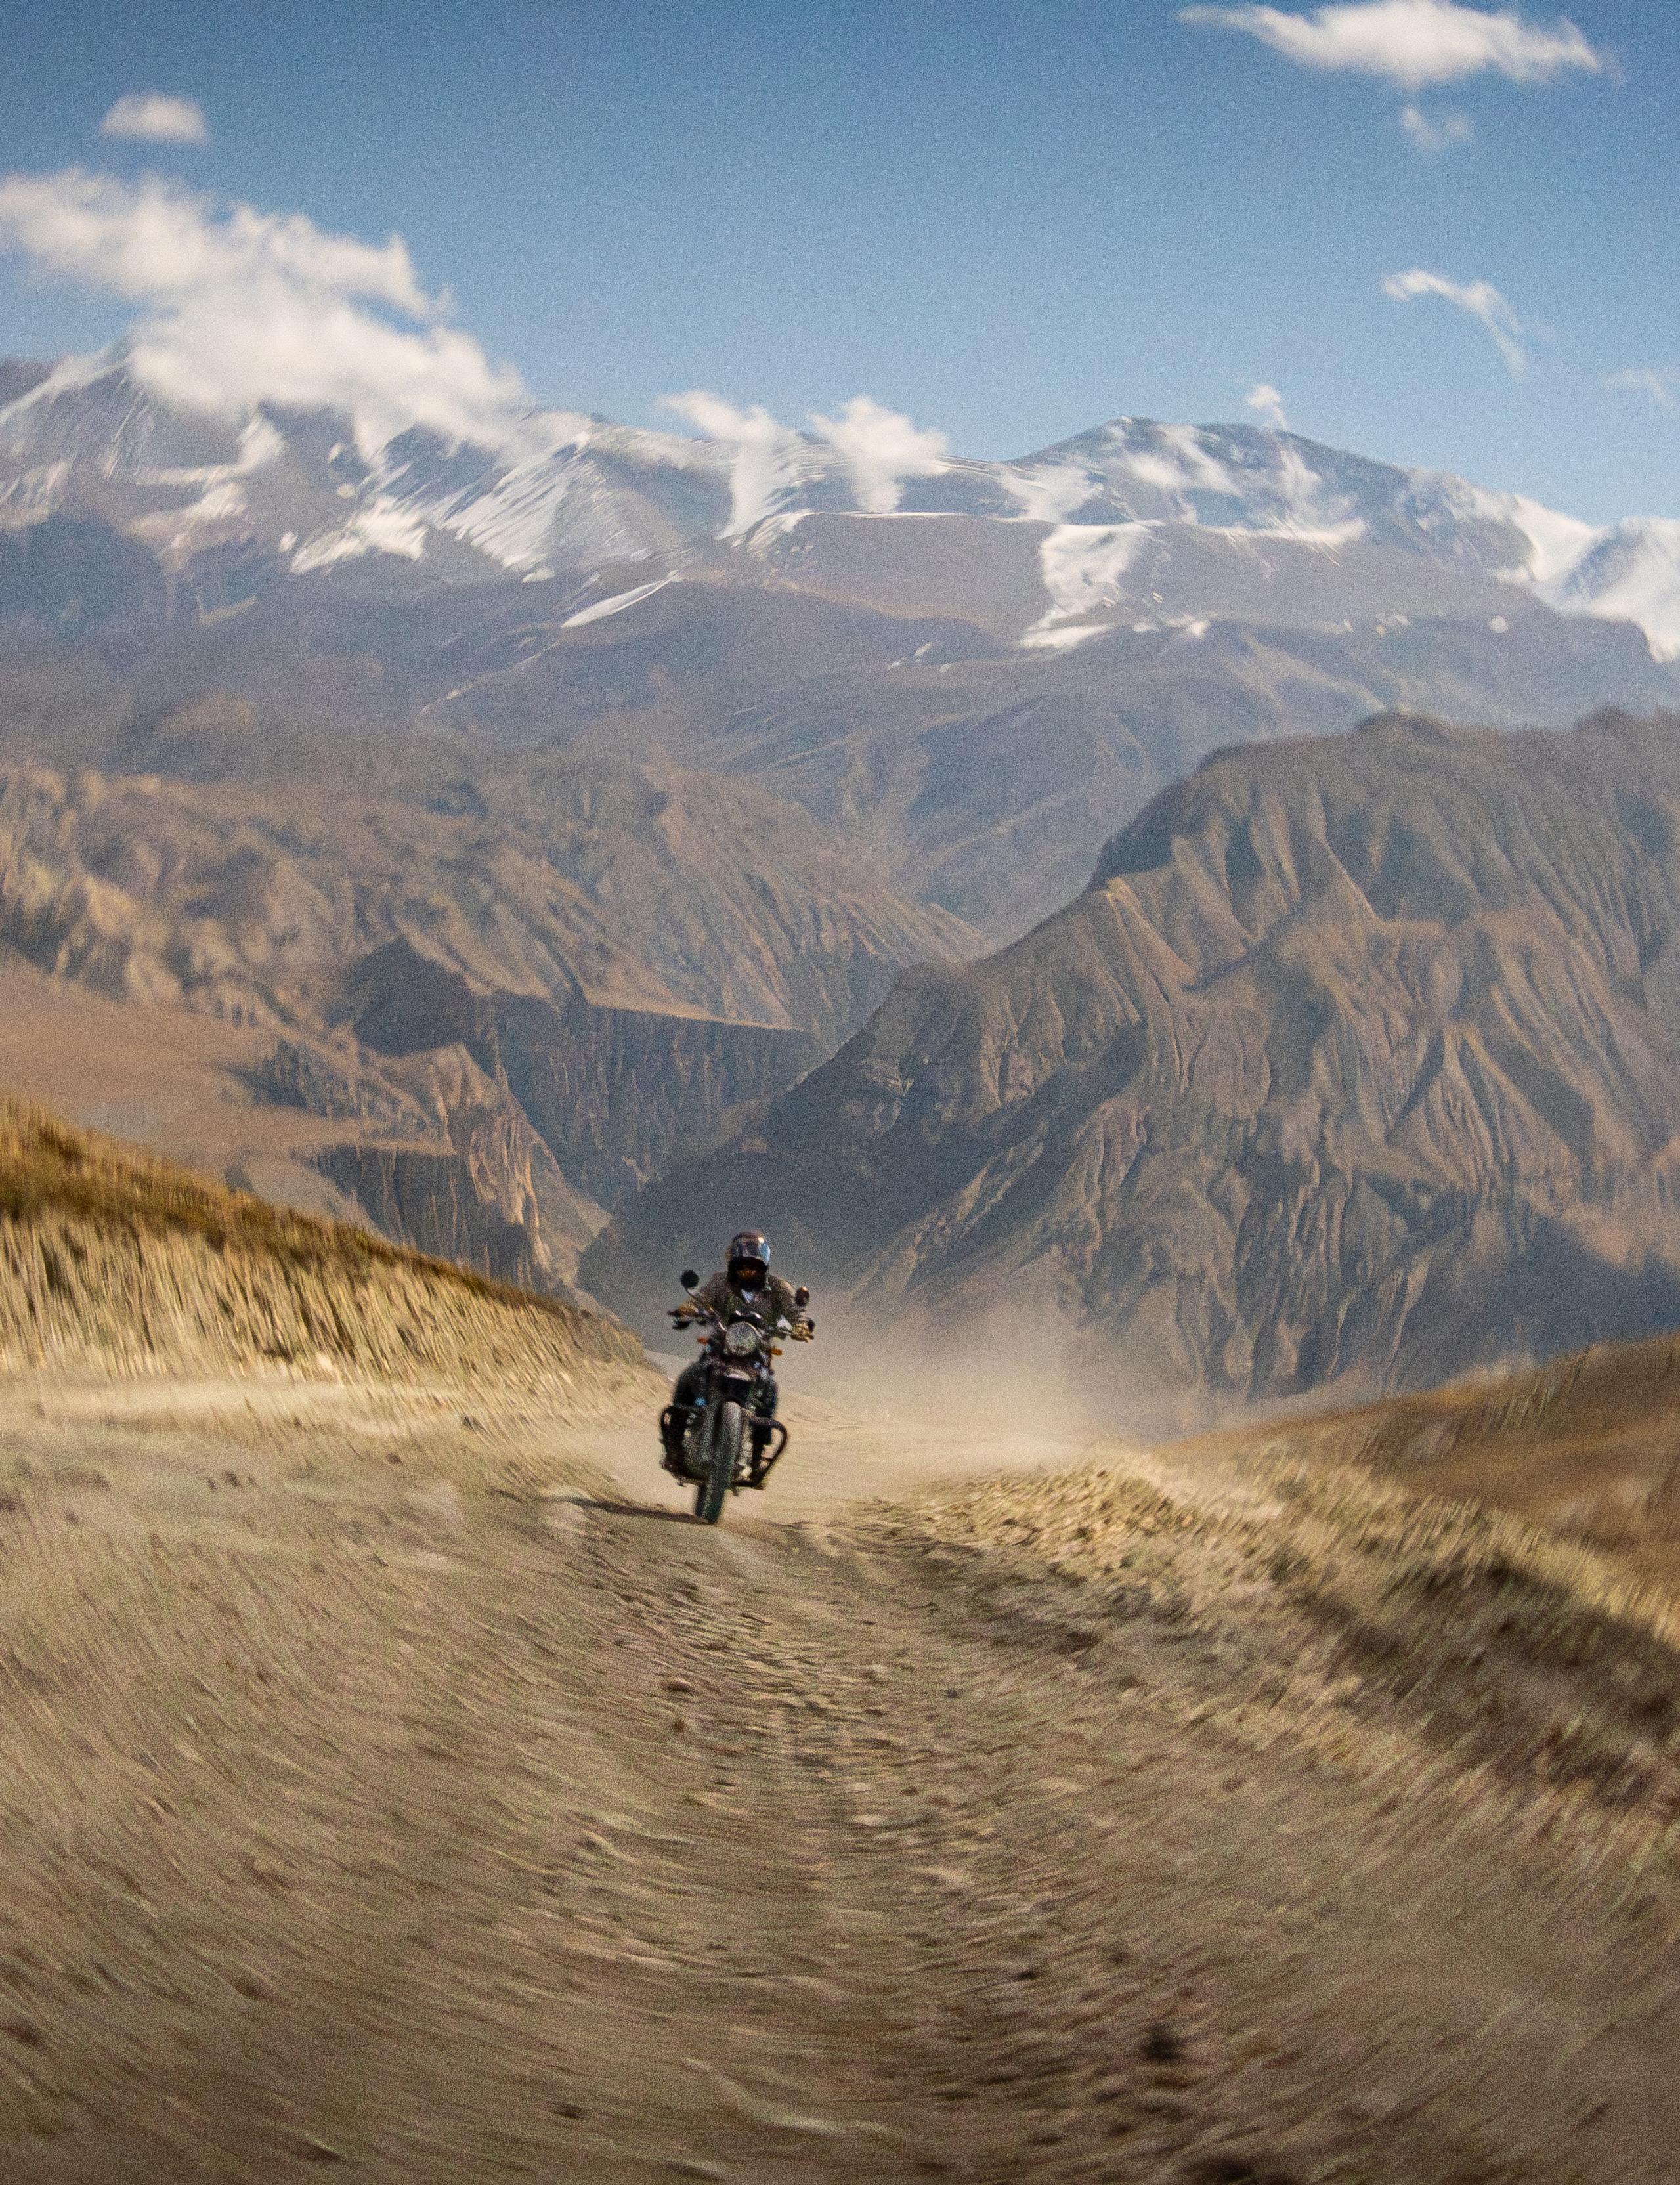 Motorcyclist riding and kicking up dust on dirt road with Himalayan mountains in the background